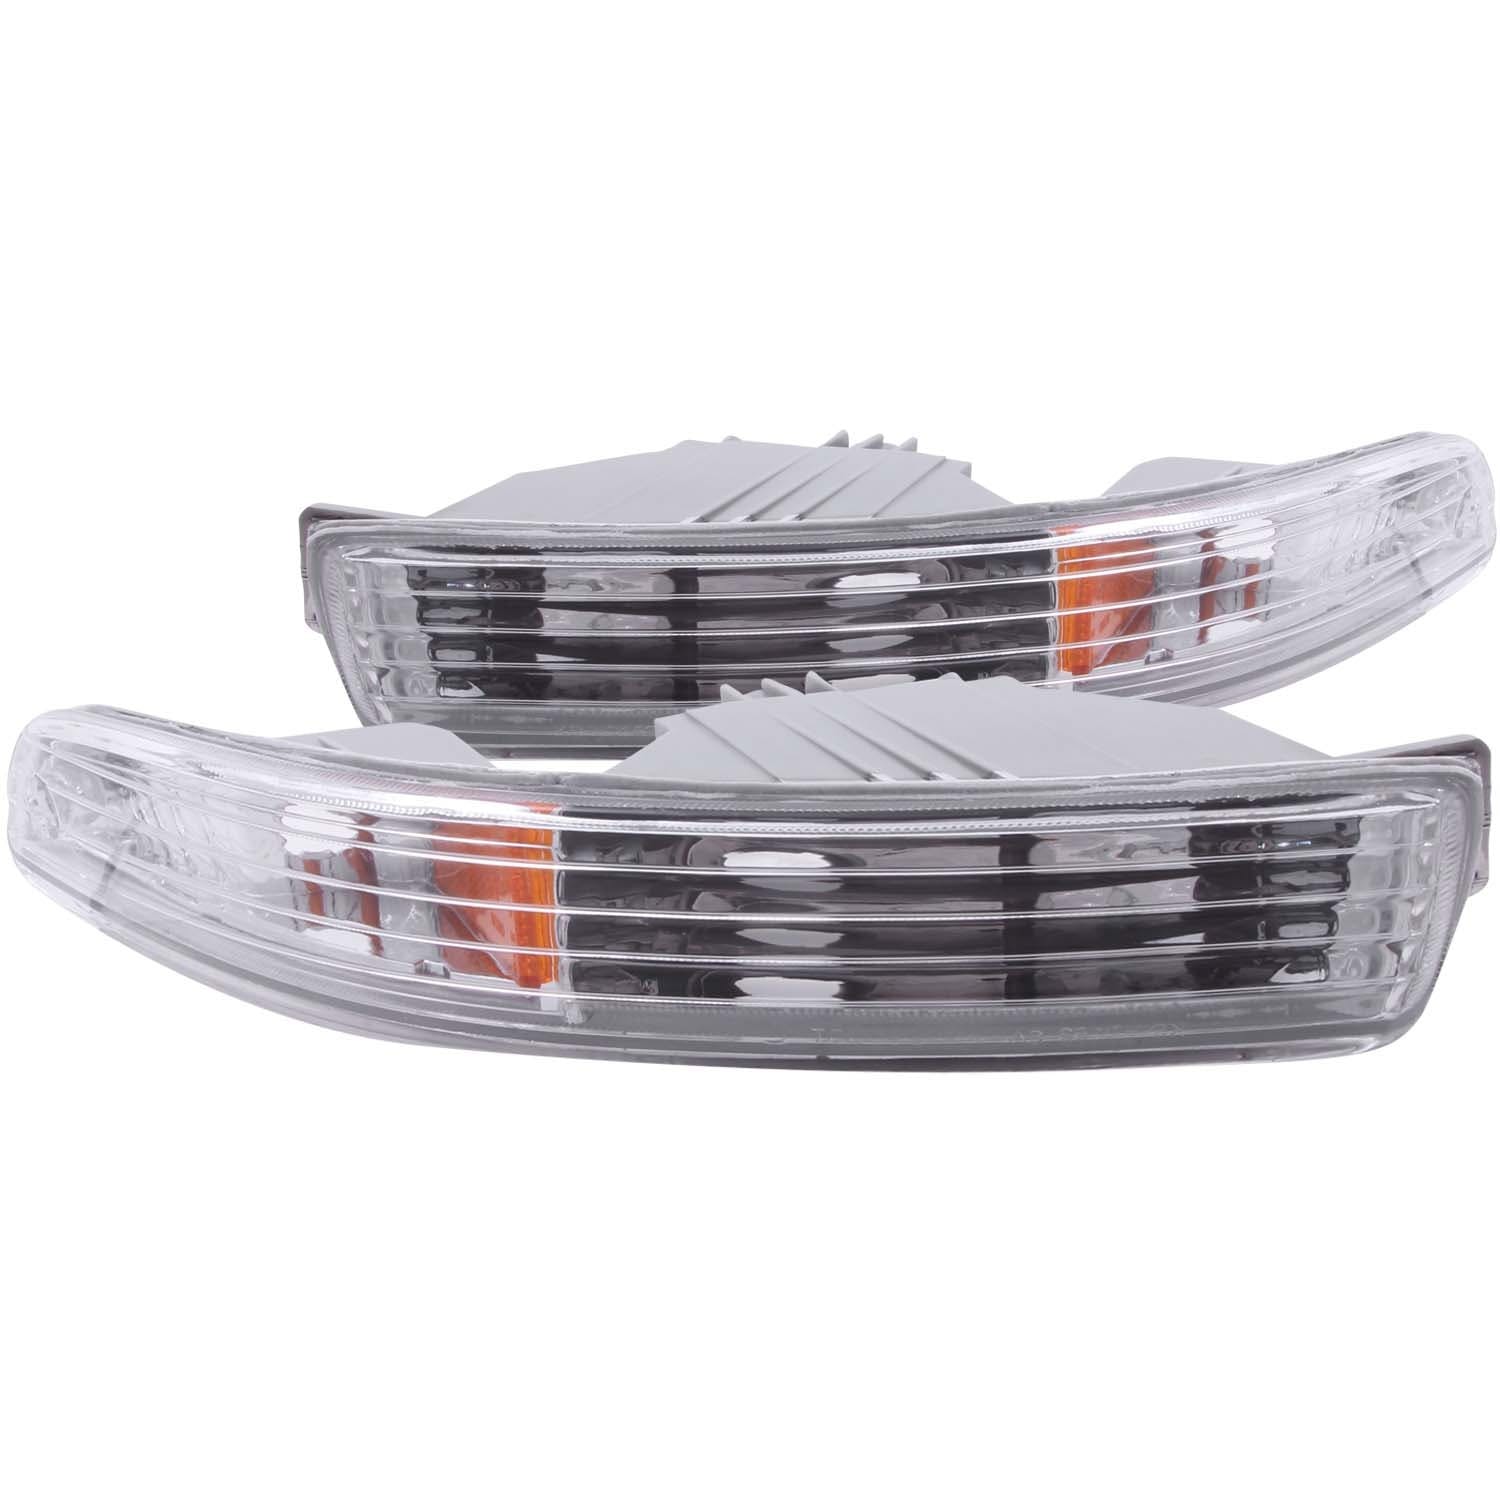 AnzoUSA 511020 Euro Parking Lights Chrome with Amber Reflector